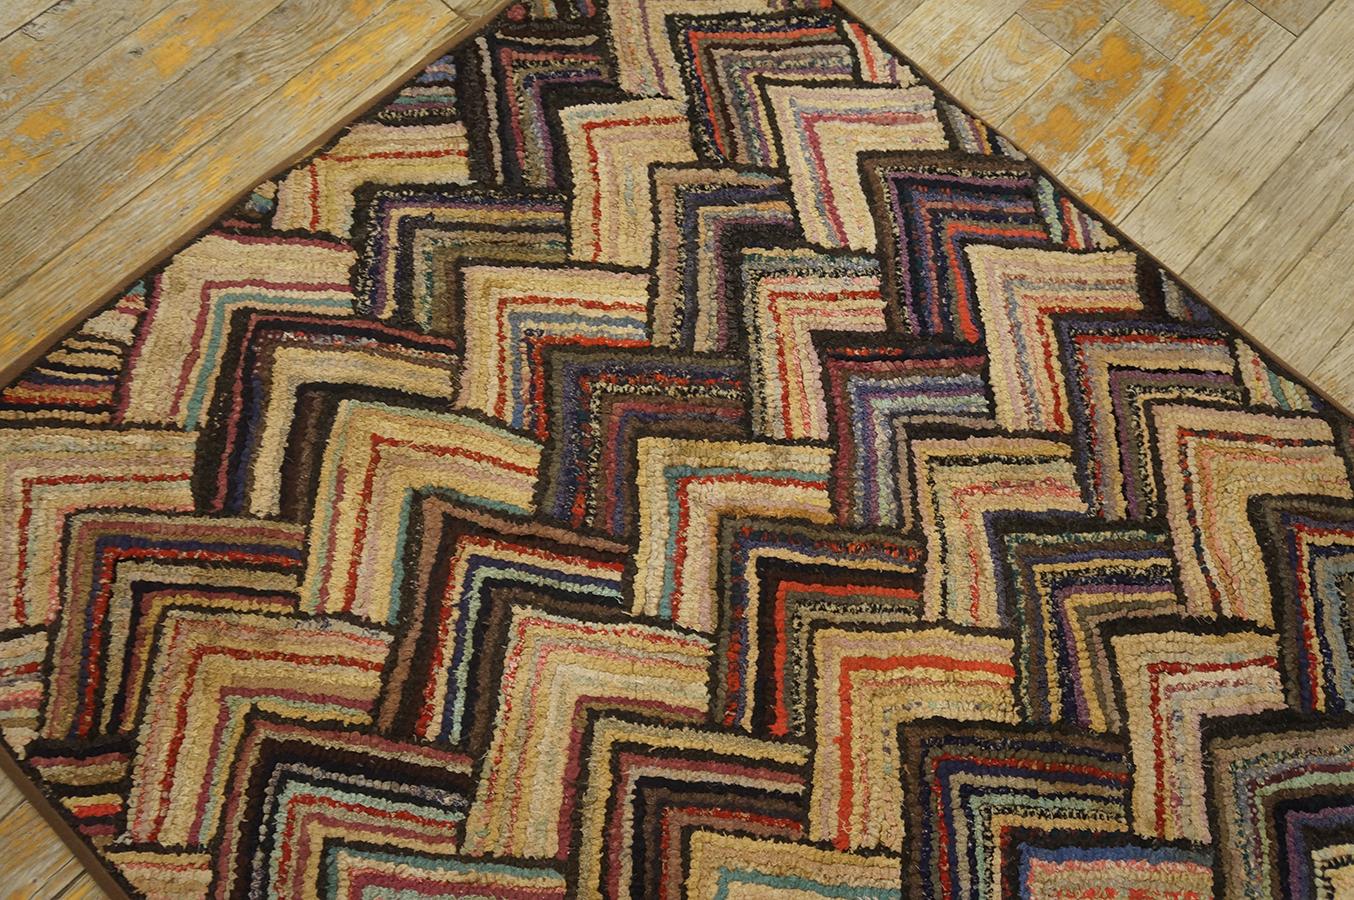 Early 20th Century American Hooked Rug ( 2' 7'' x 4' 6'' - 78 x 137 cm ) For Sale 1